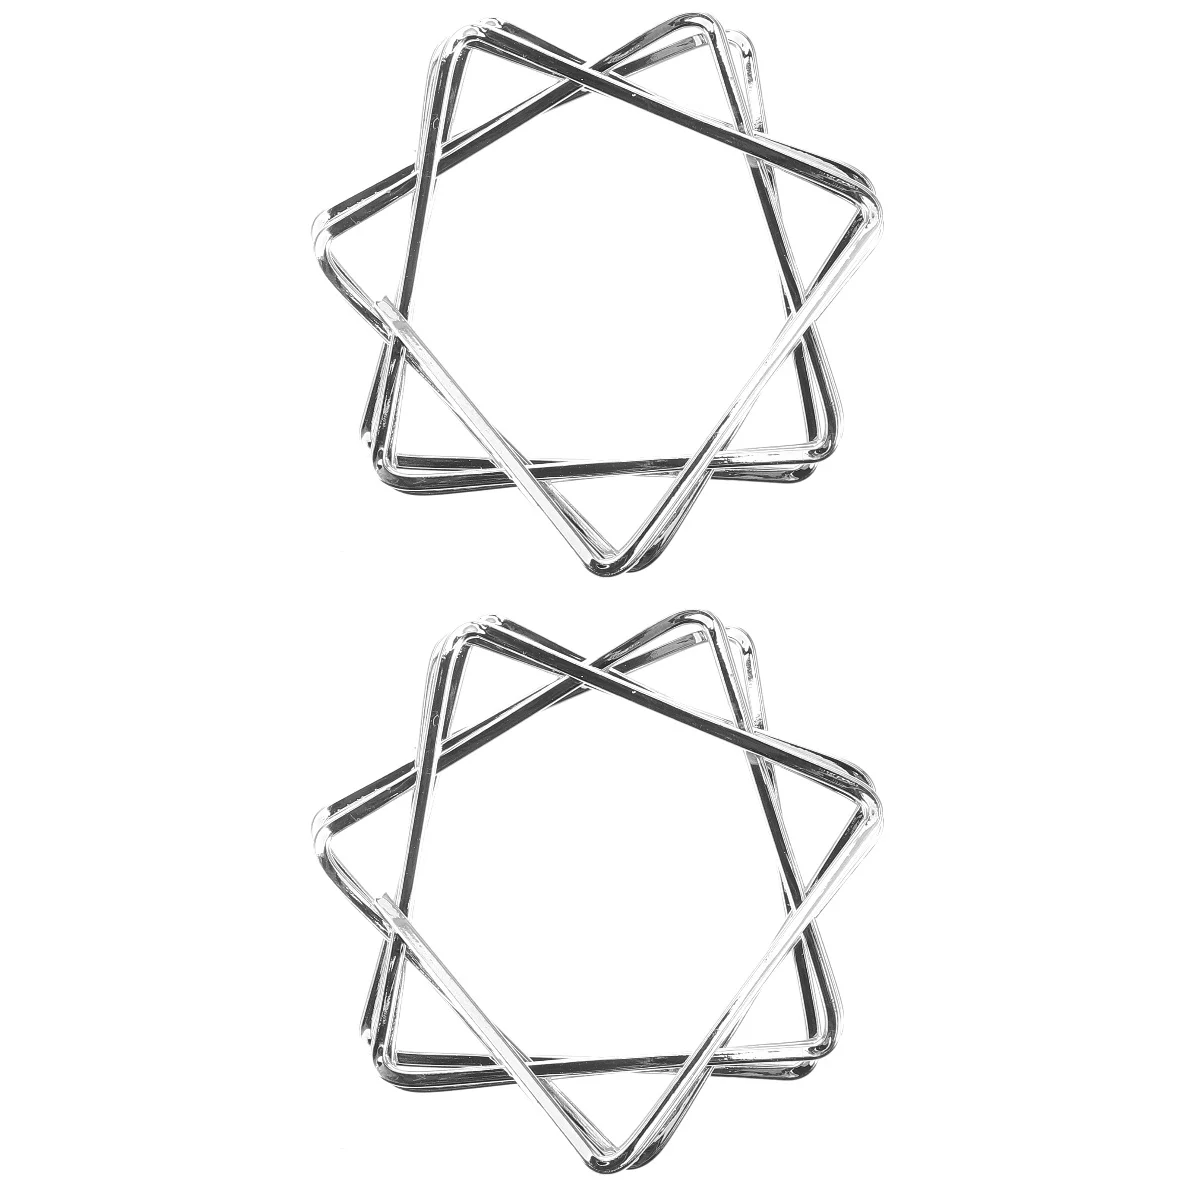 

Hollow Napkin Ring Metal Circle Desktop Ornament Buckles Supplies Holders Party Rings Serviette Dinning Table Decors Tablescape